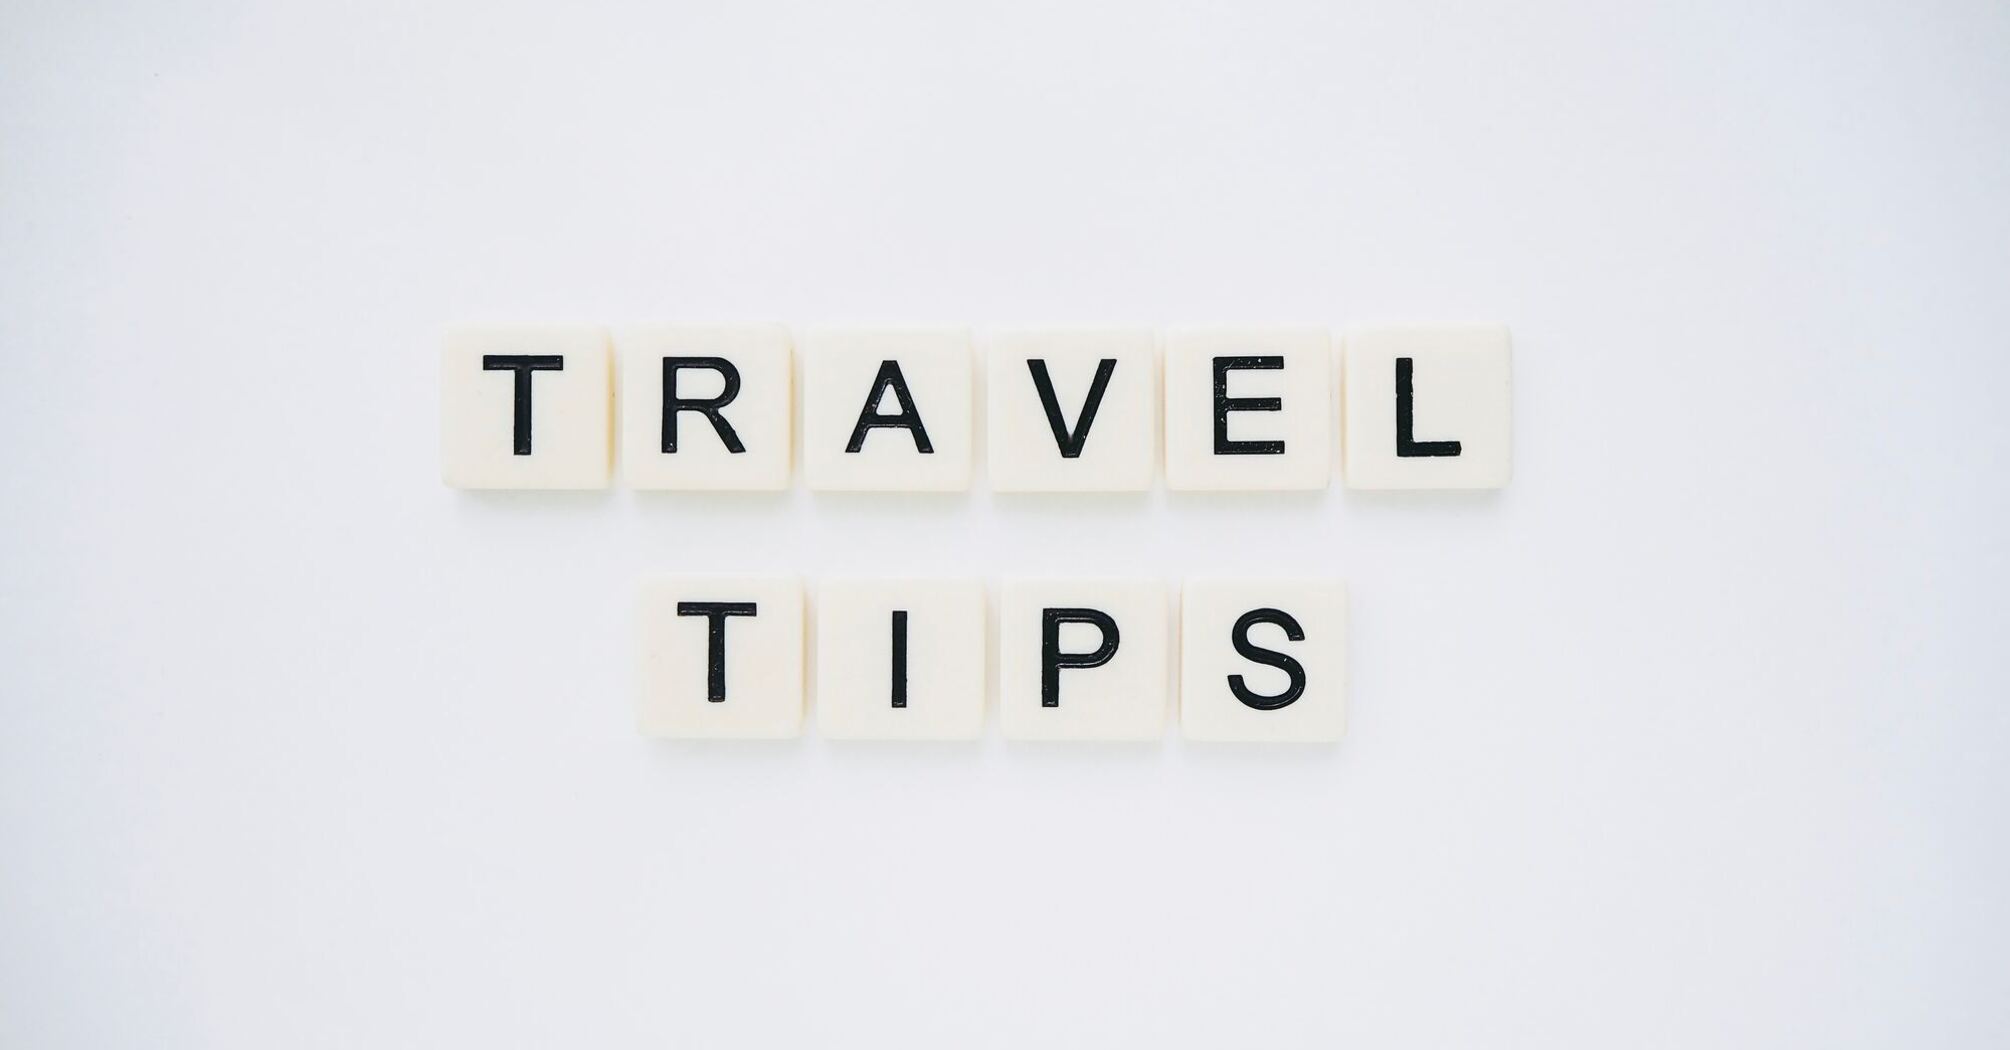 Scrabble tiles spelling out 'TRAVEL TIPS' on a white background